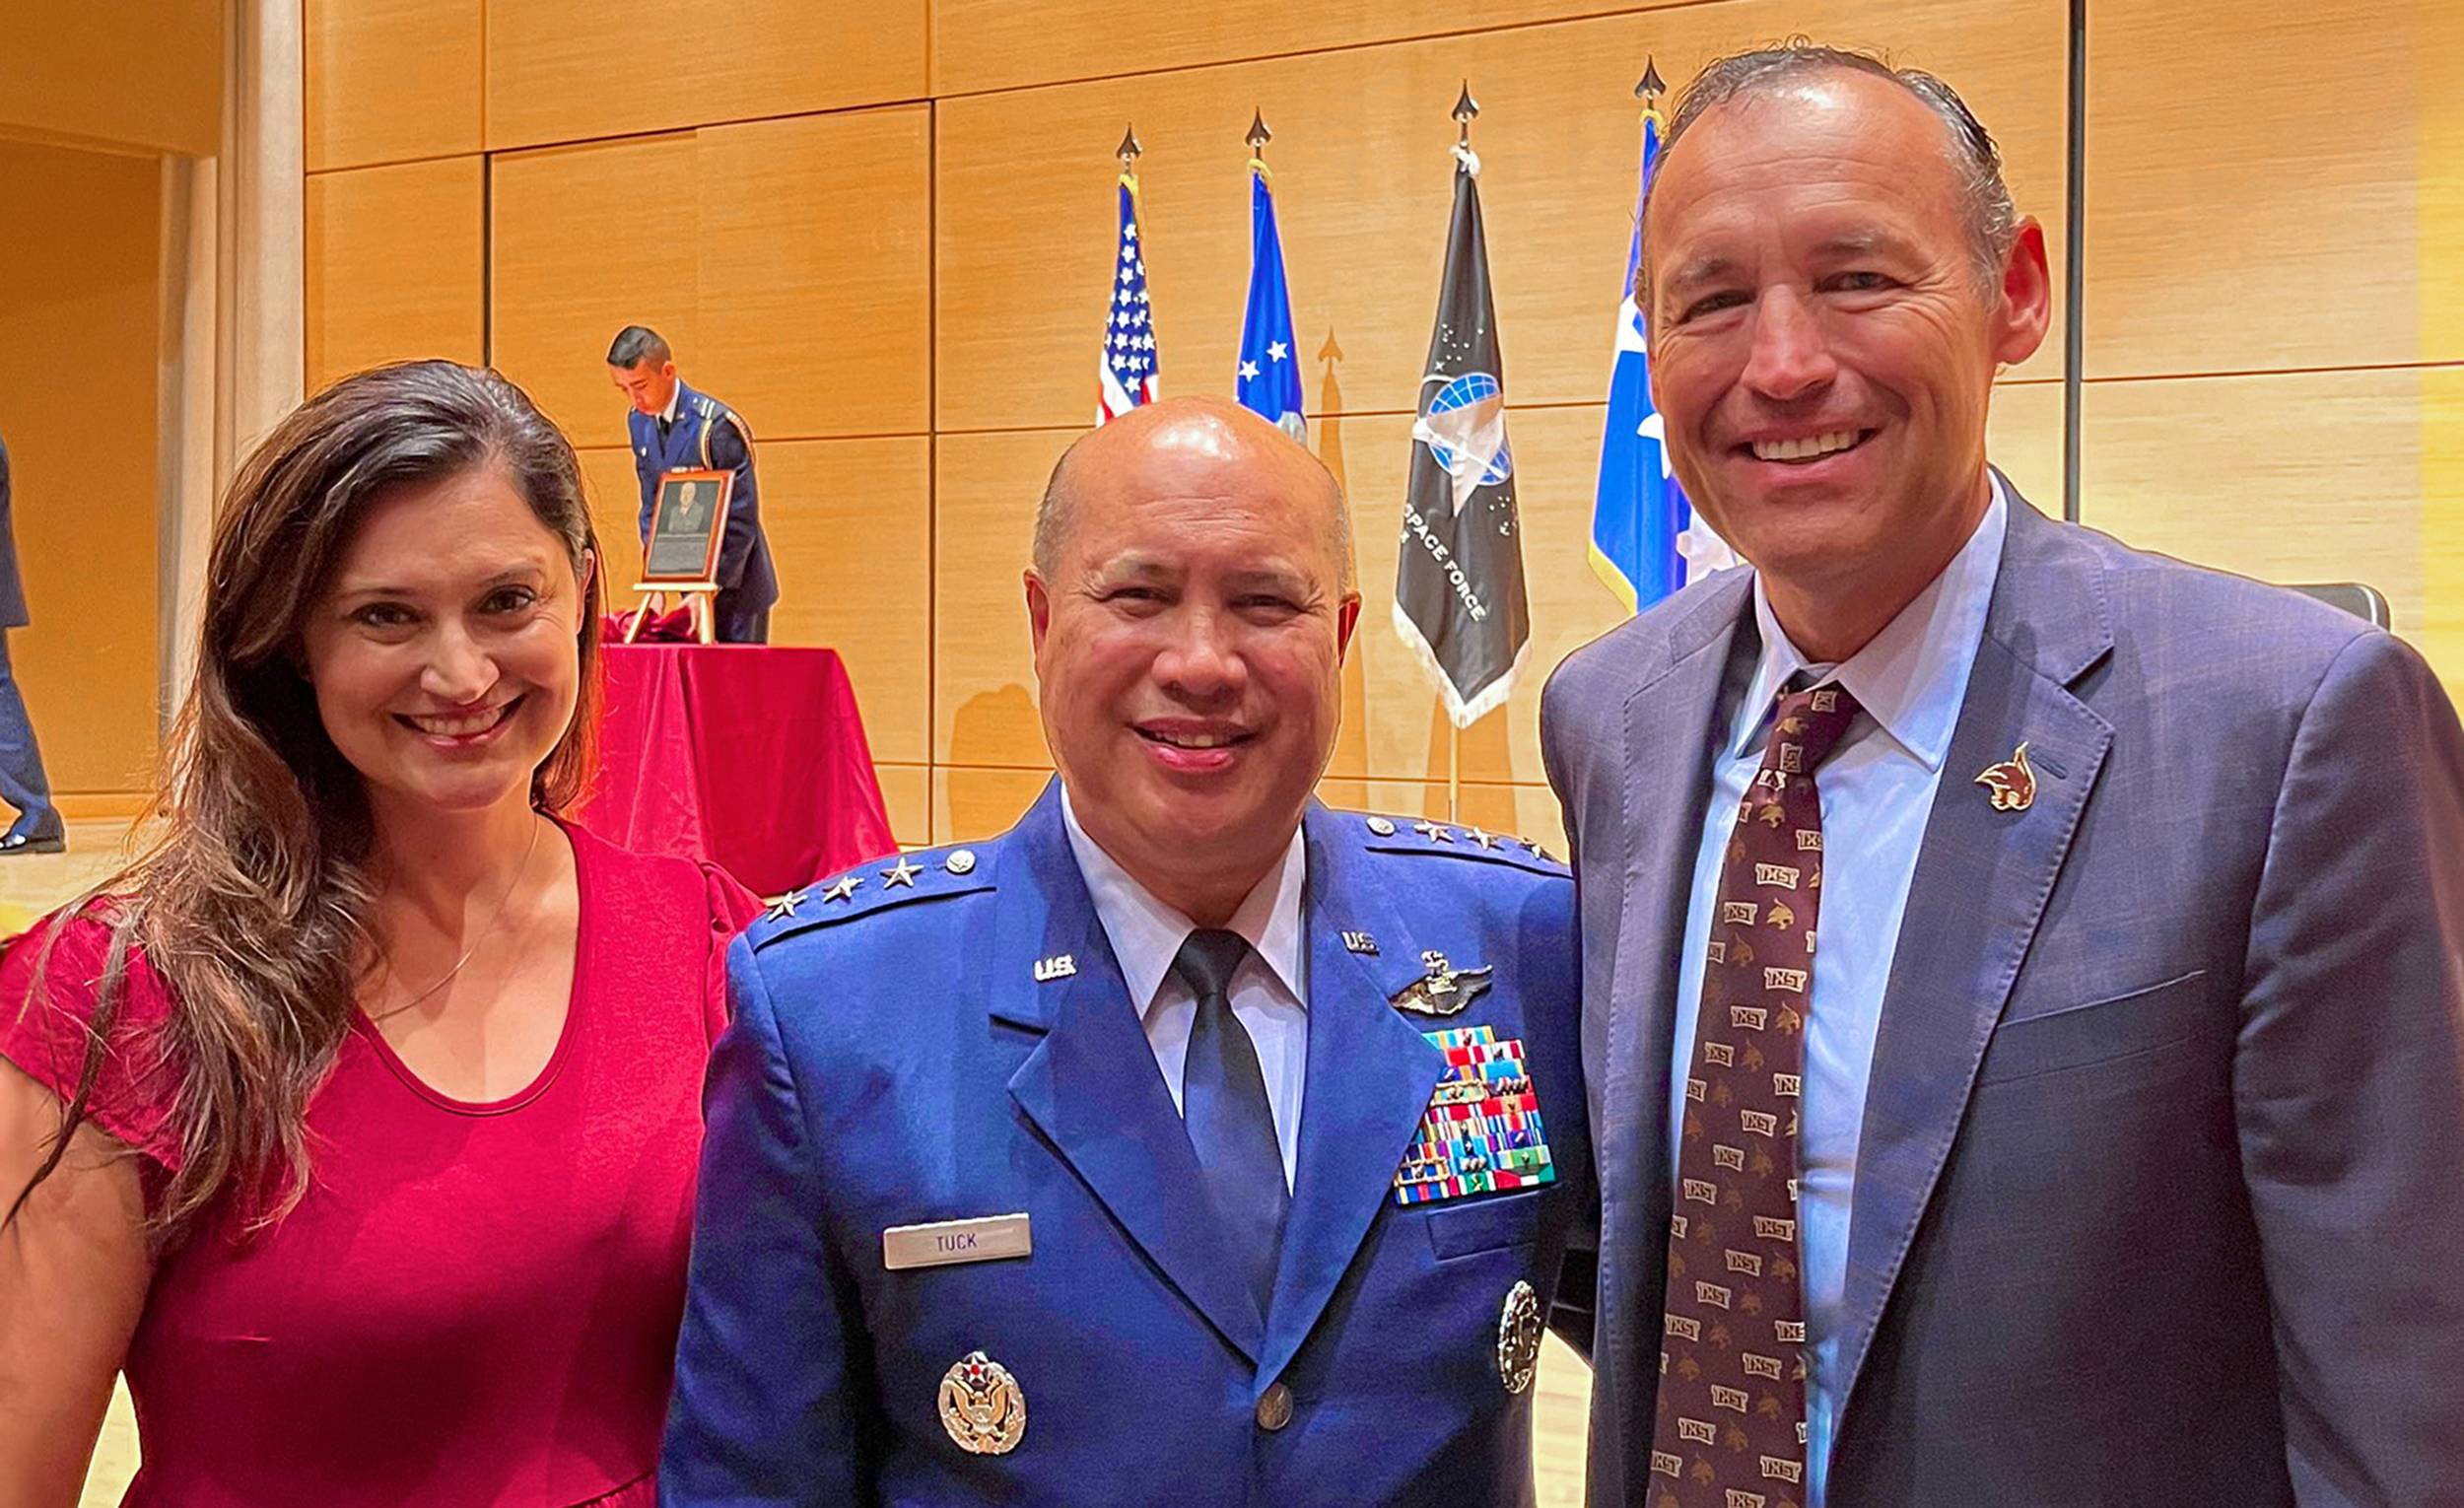 President Damphousse poses for a group photo with air force ROTC alum